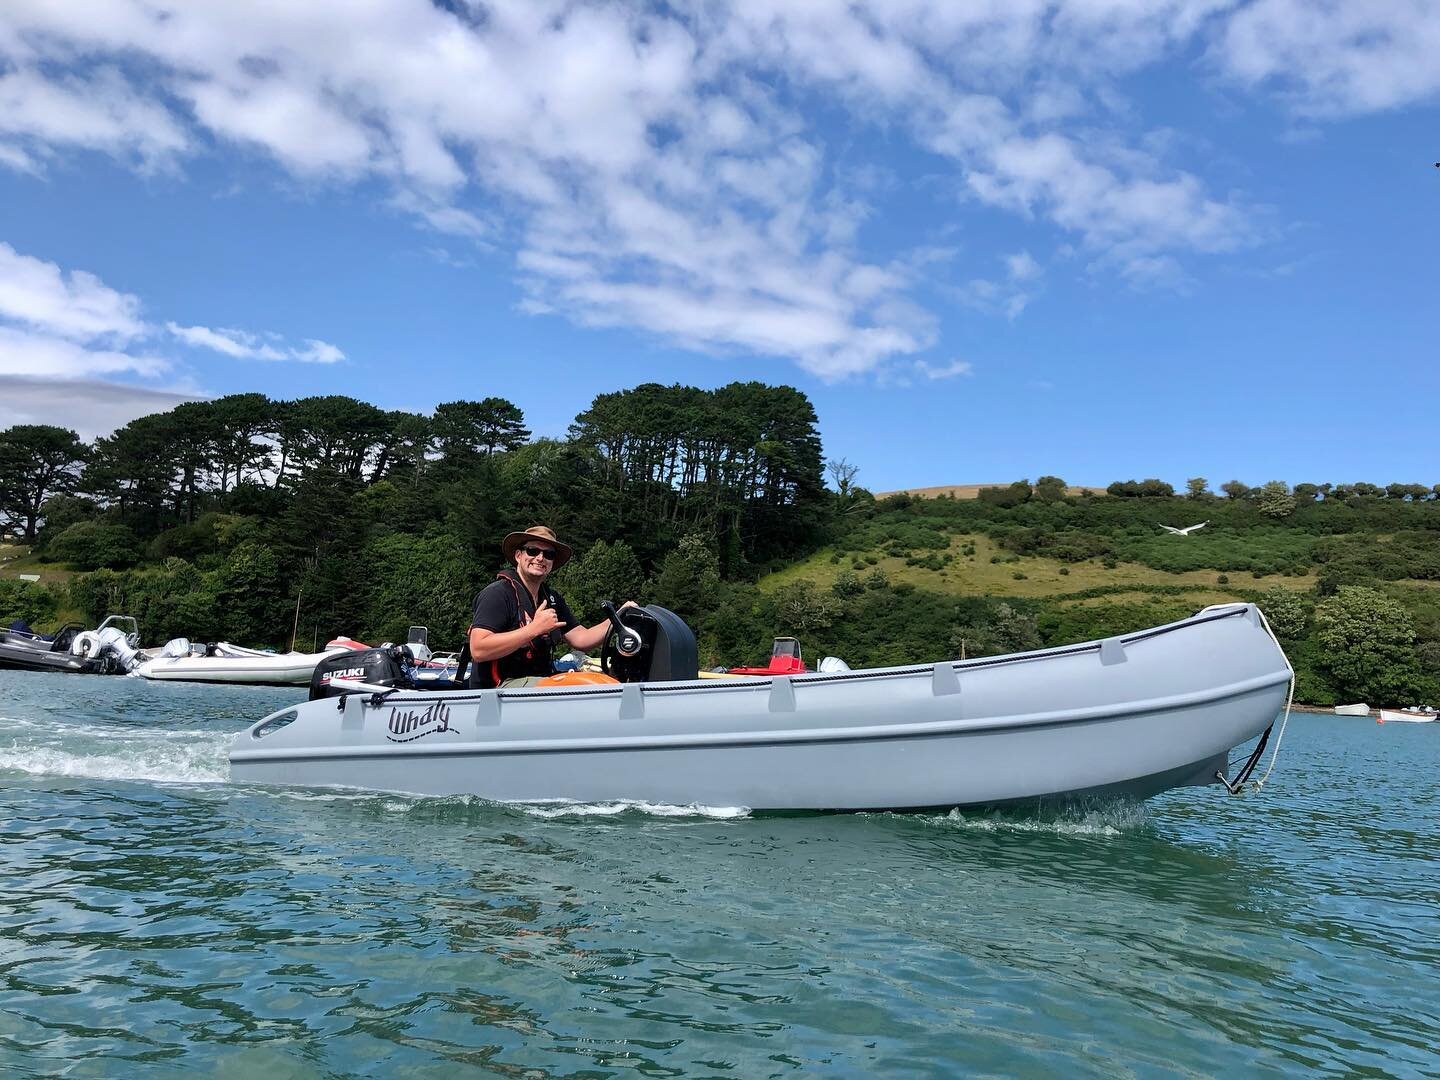 Fancy having a whale 🐳 of a time on your next trip to Salcombe? 

Today we launched one of our brand new Whaly 435&rsquo;s 🚤

These capable hulls can comfortably fit 8 people and provide easy beaching with boarding steps! 🏝️ ⚓️

Stay posted&hellip